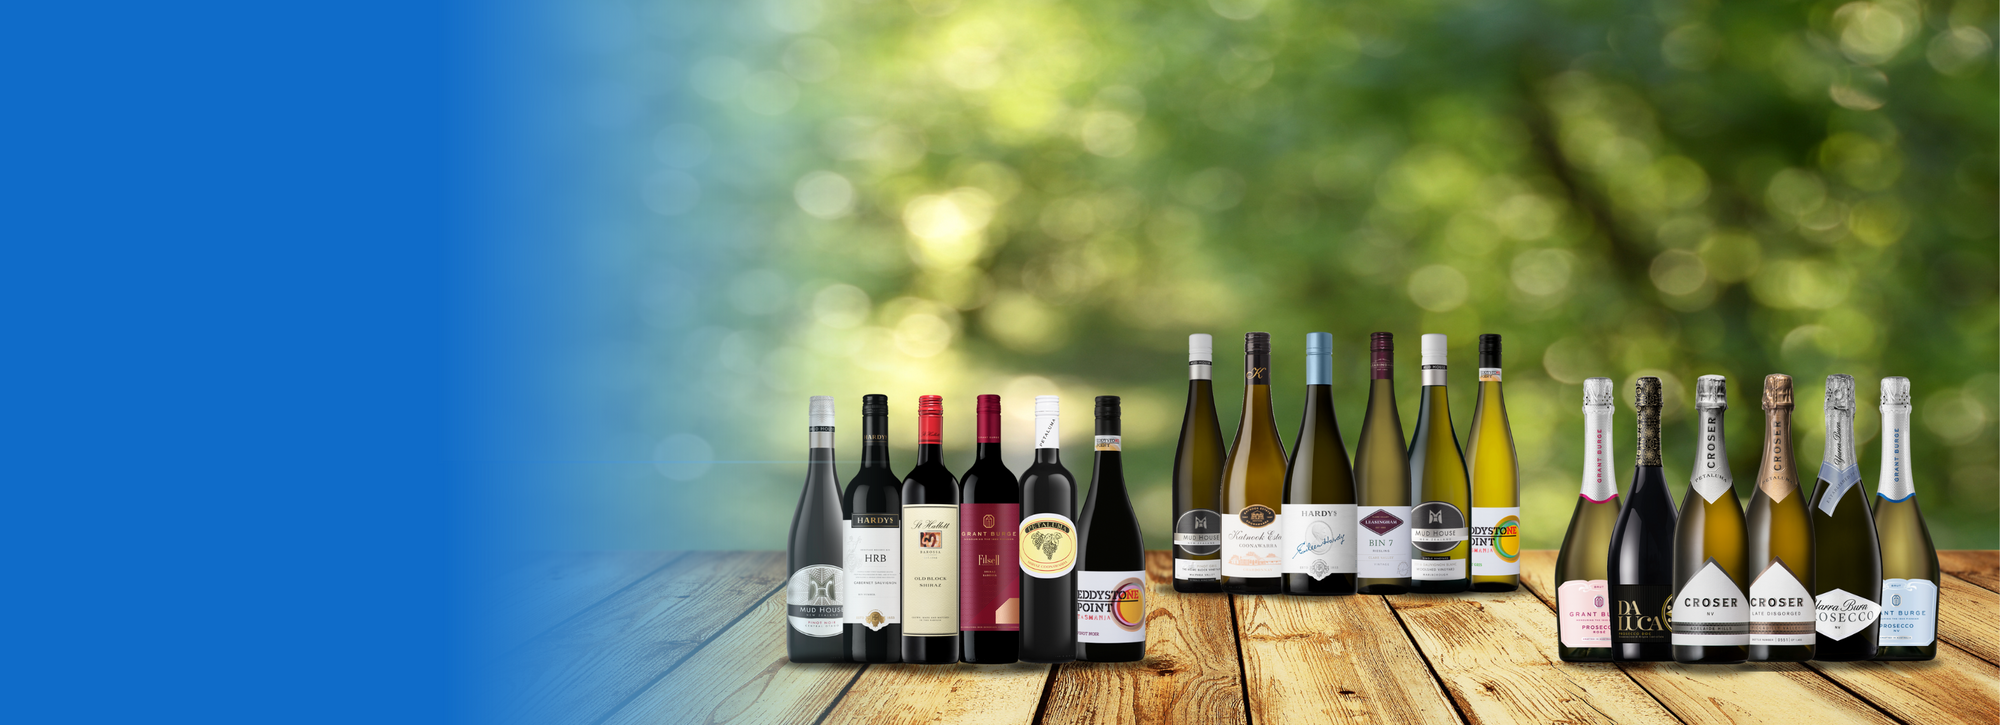 Buy 2 mixed packs of the different wines and get a free gift, none wine product